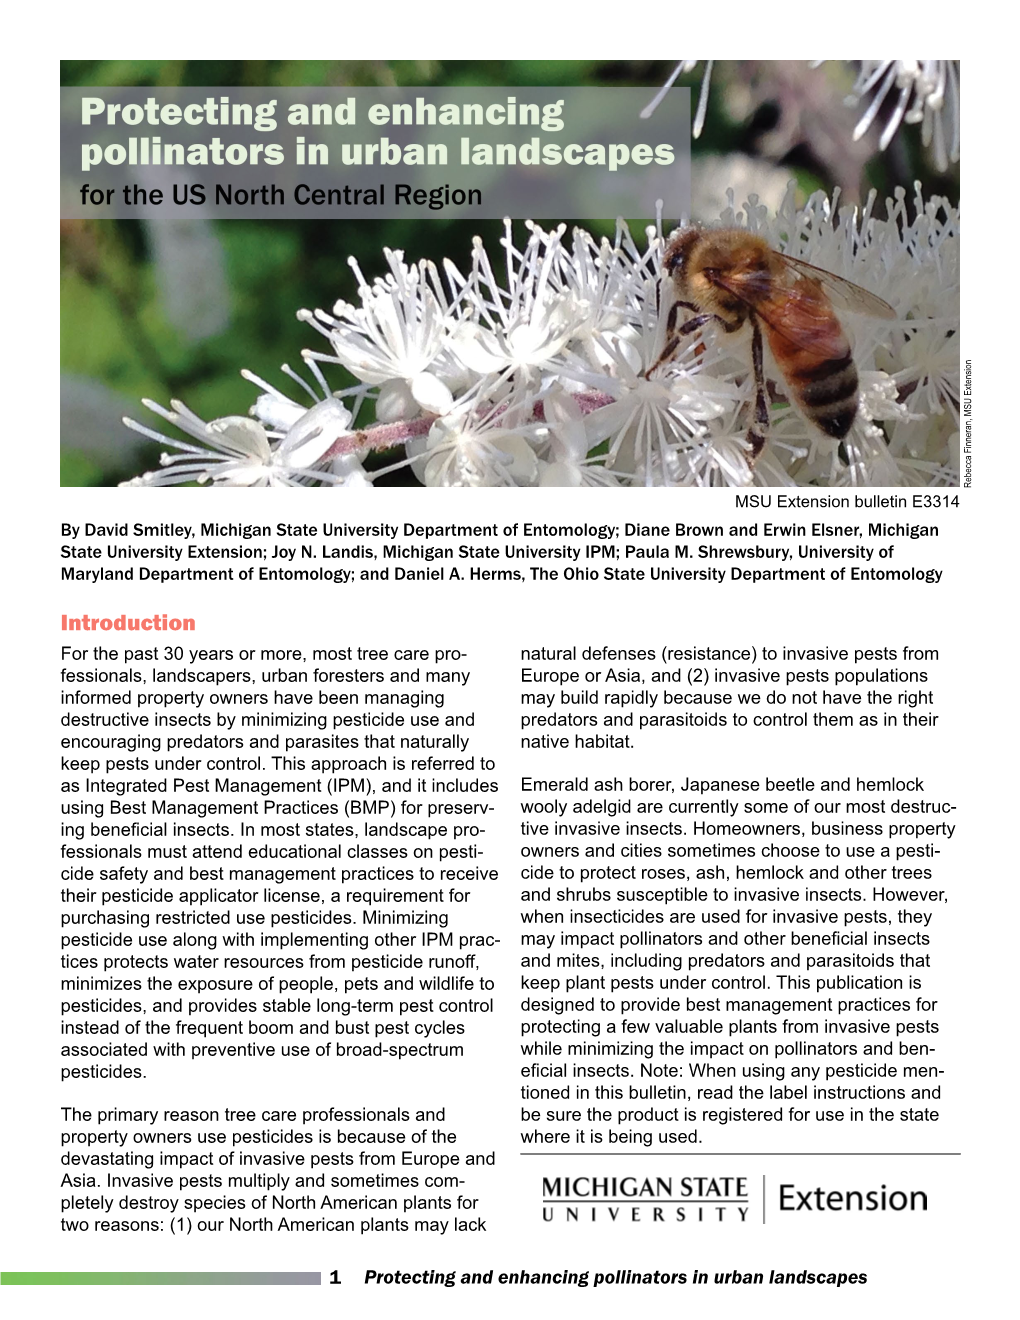 Protecting and Enhancing Pollinators in Urban Landscapes